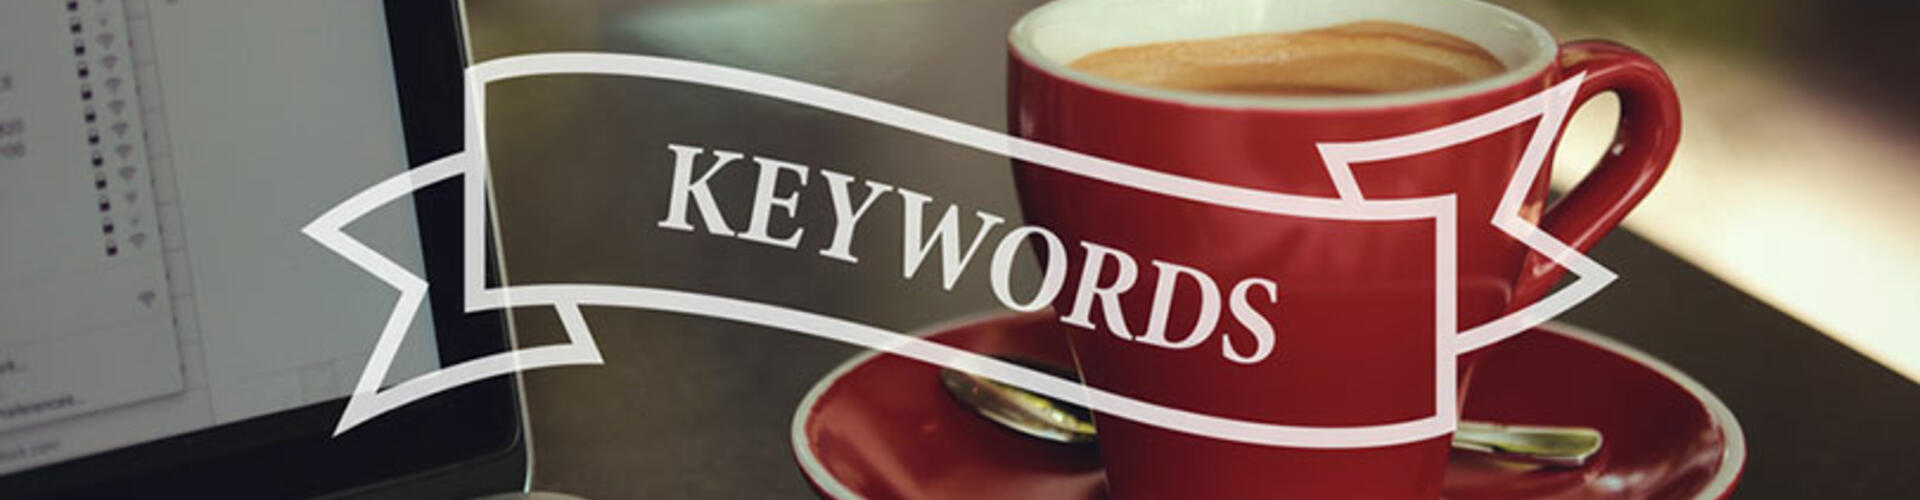 How to Use Job Keywords to Score a Job Interview